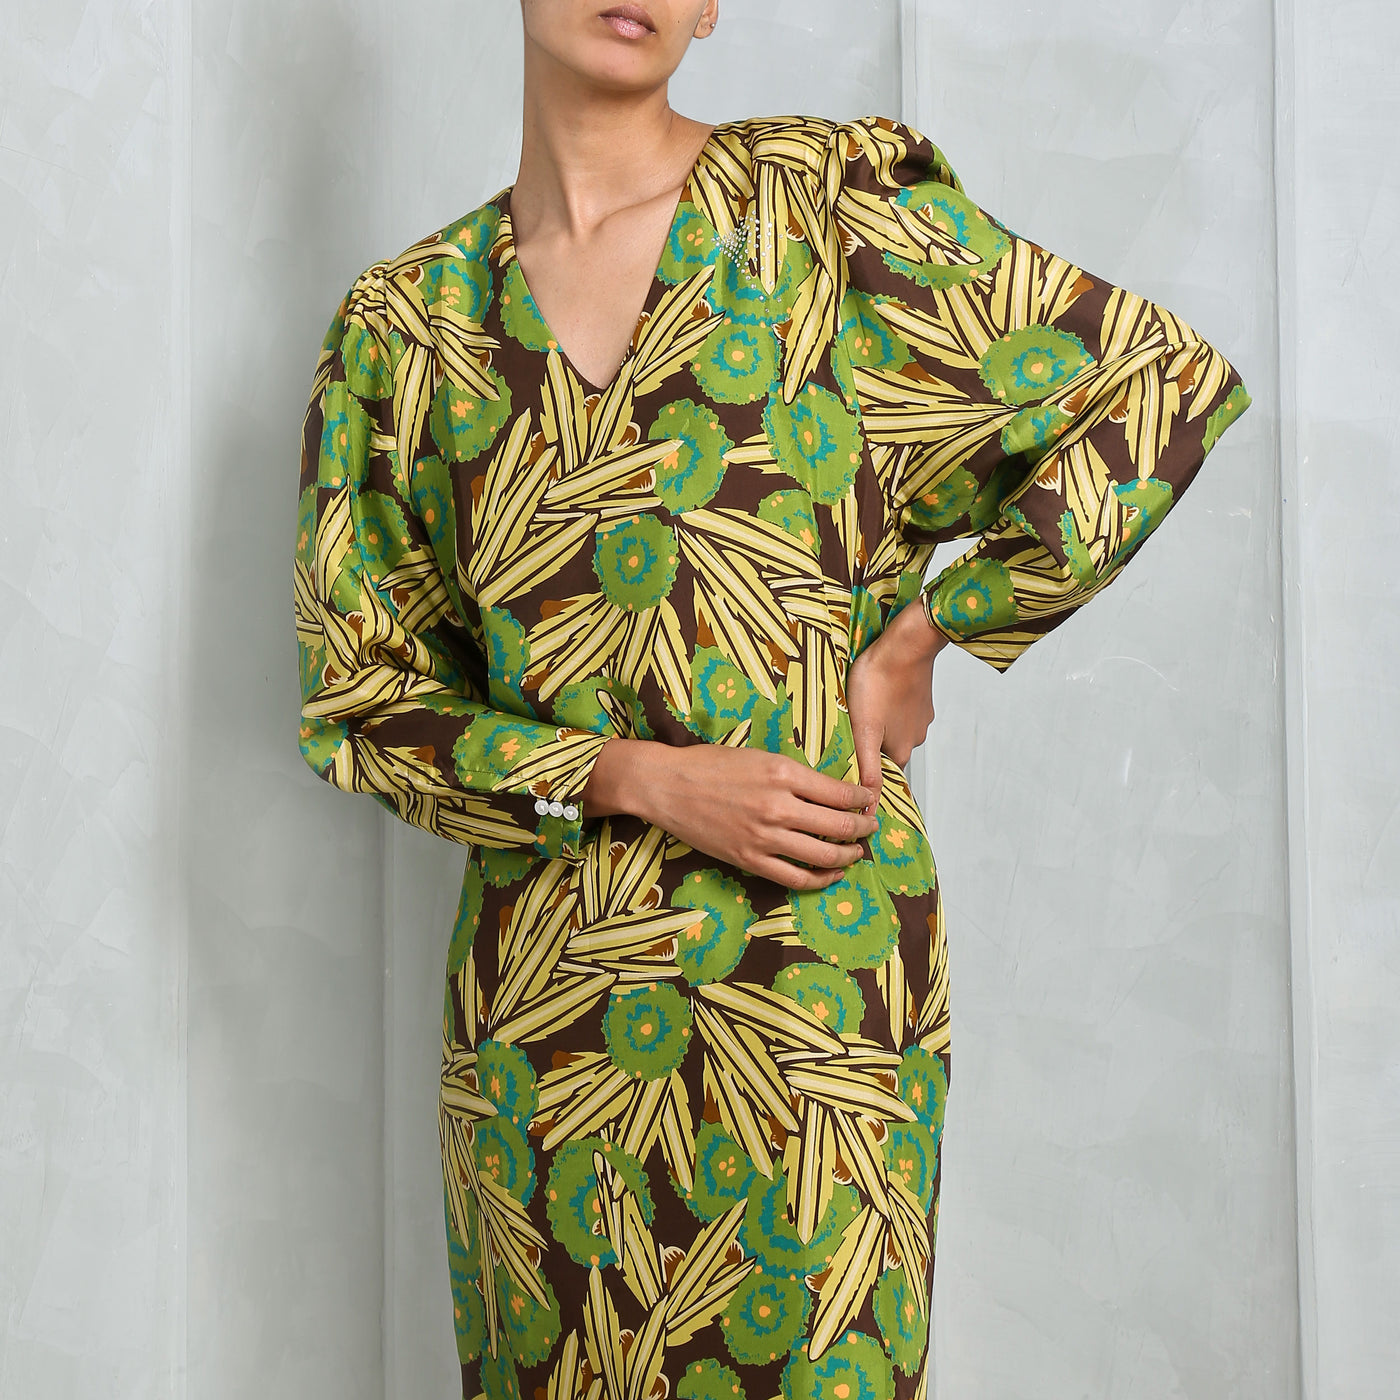 Rekha Printed Midi Dress from Bhaane in brown , yellow and green